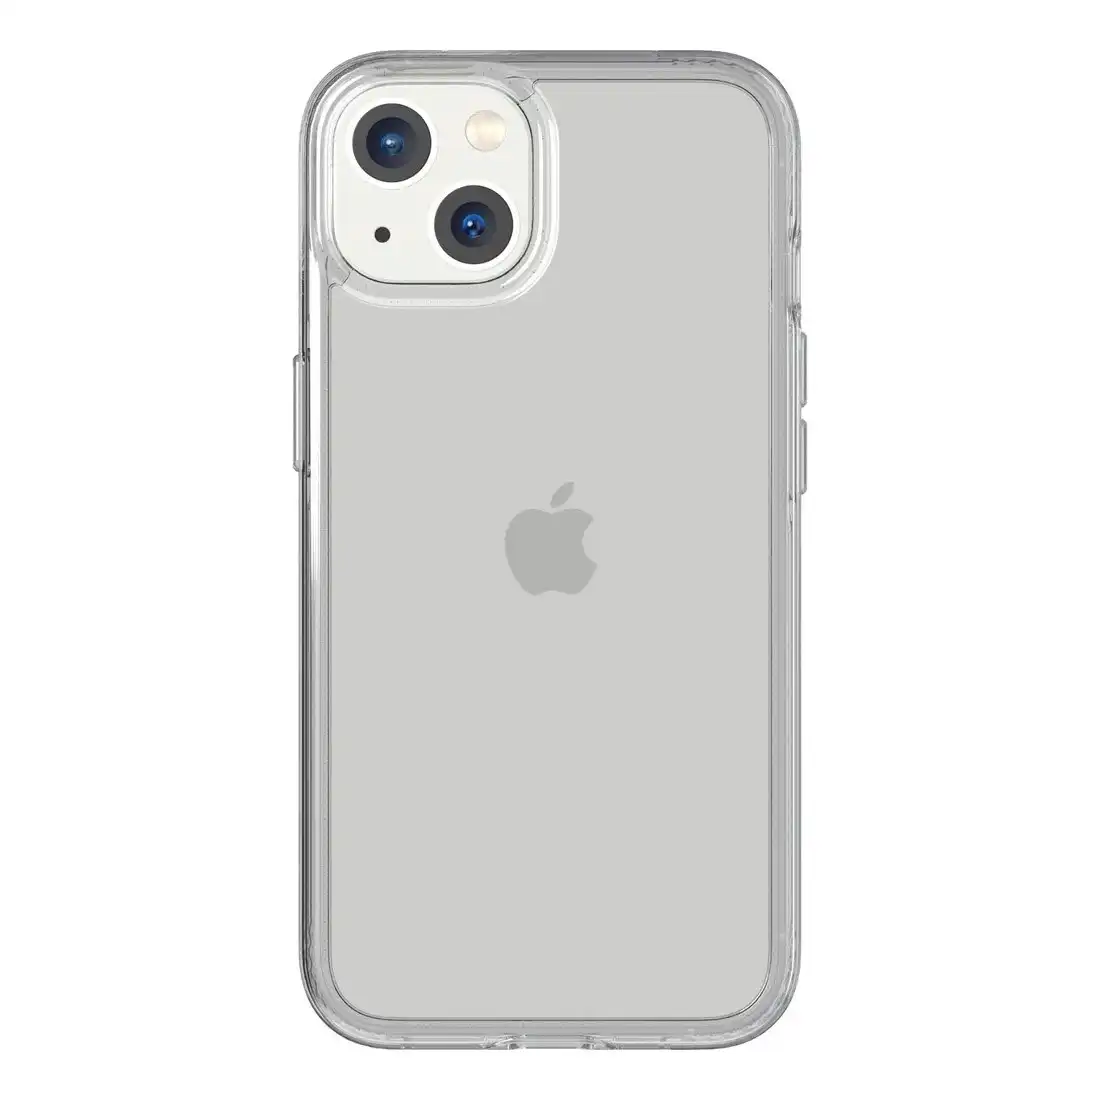 Tech21 EvoClear Case for iPhone 13 T21-8937 - Clear